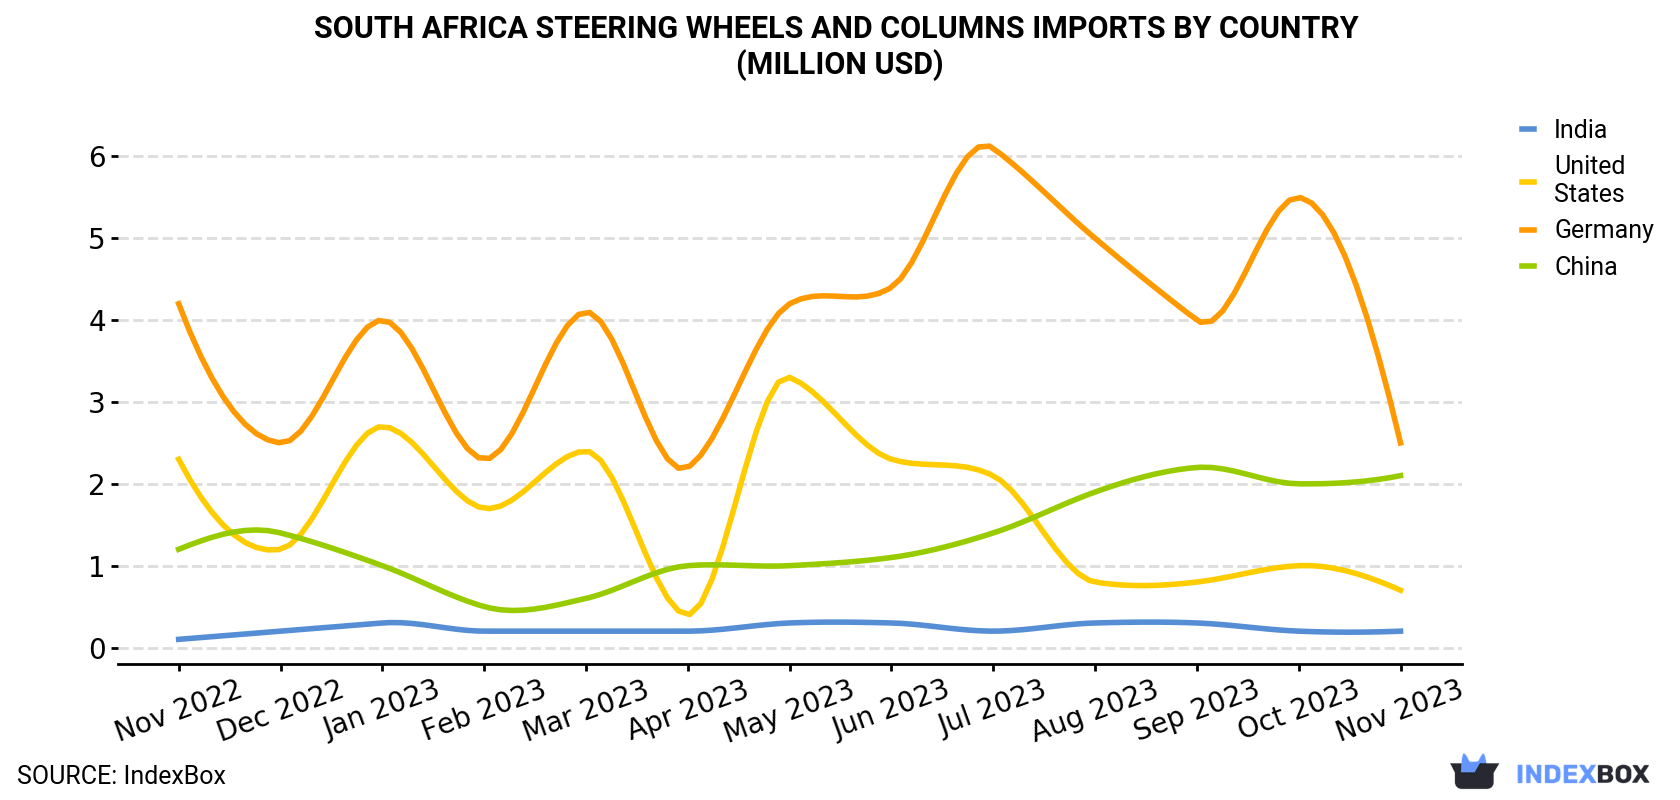 South Africa Steering Wheels And Columns Imports By Country (Million USD)